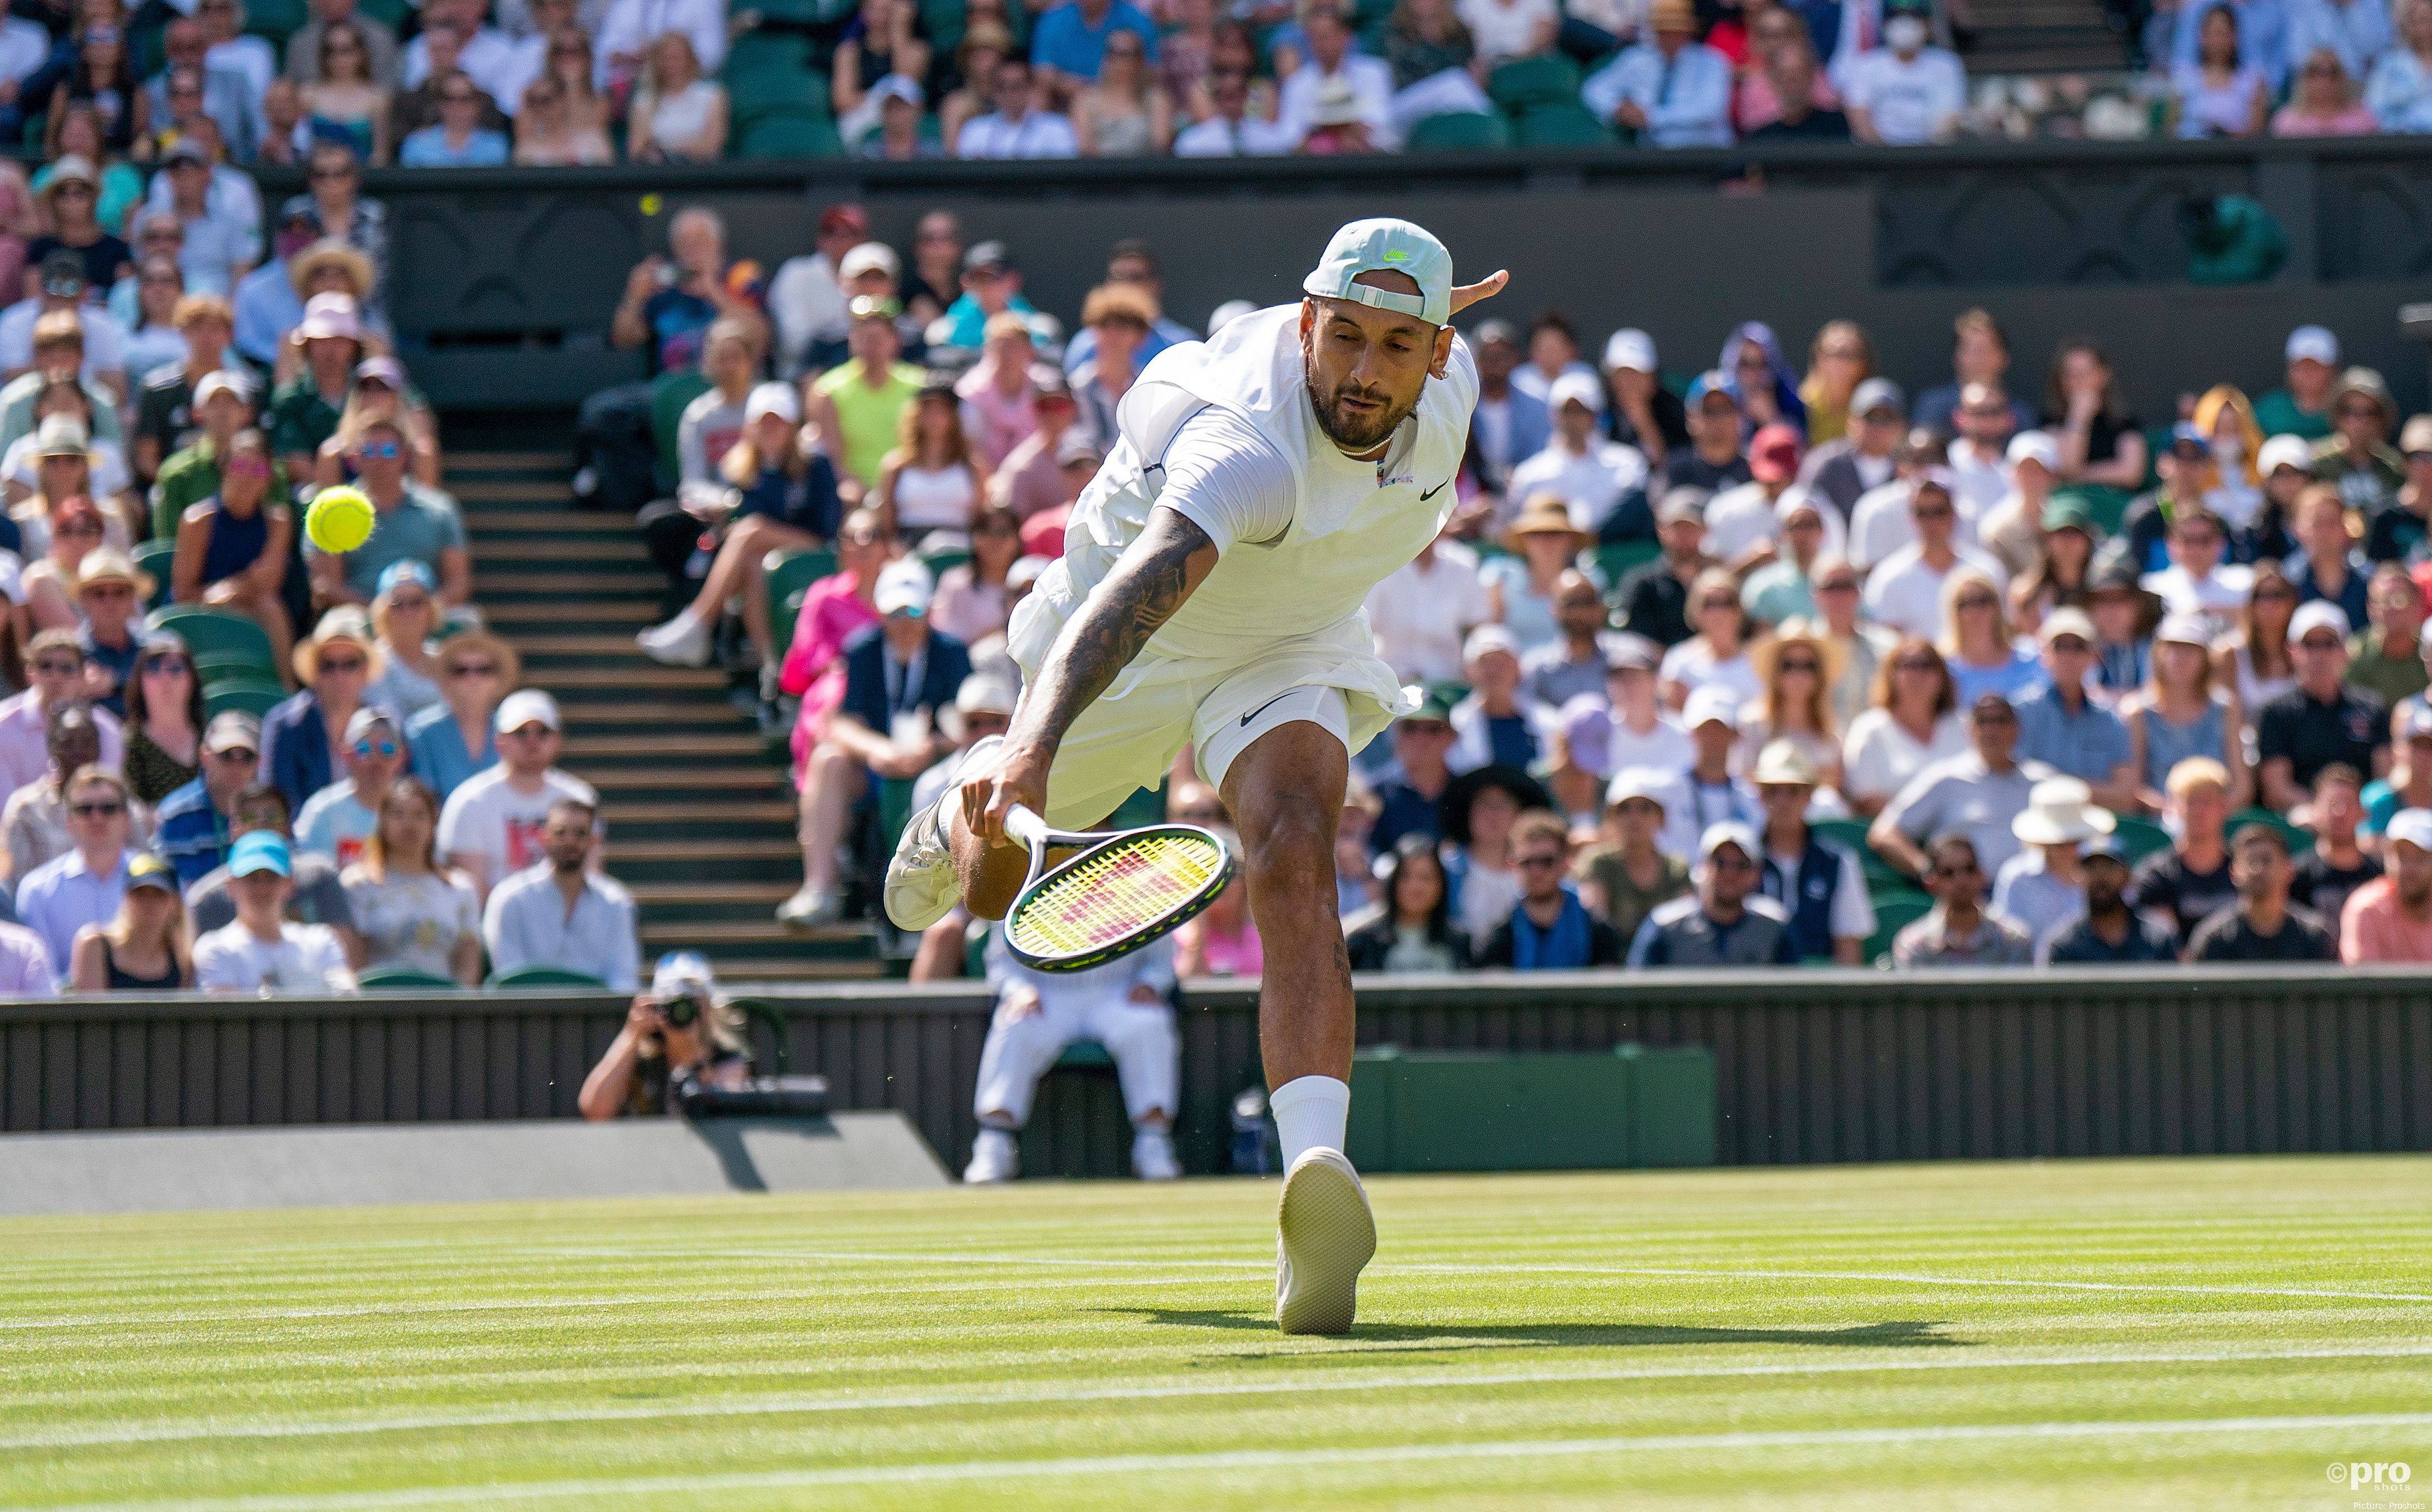 Kyrgios lost in the 2022 Wimbledon final against Djokovic in four sets.